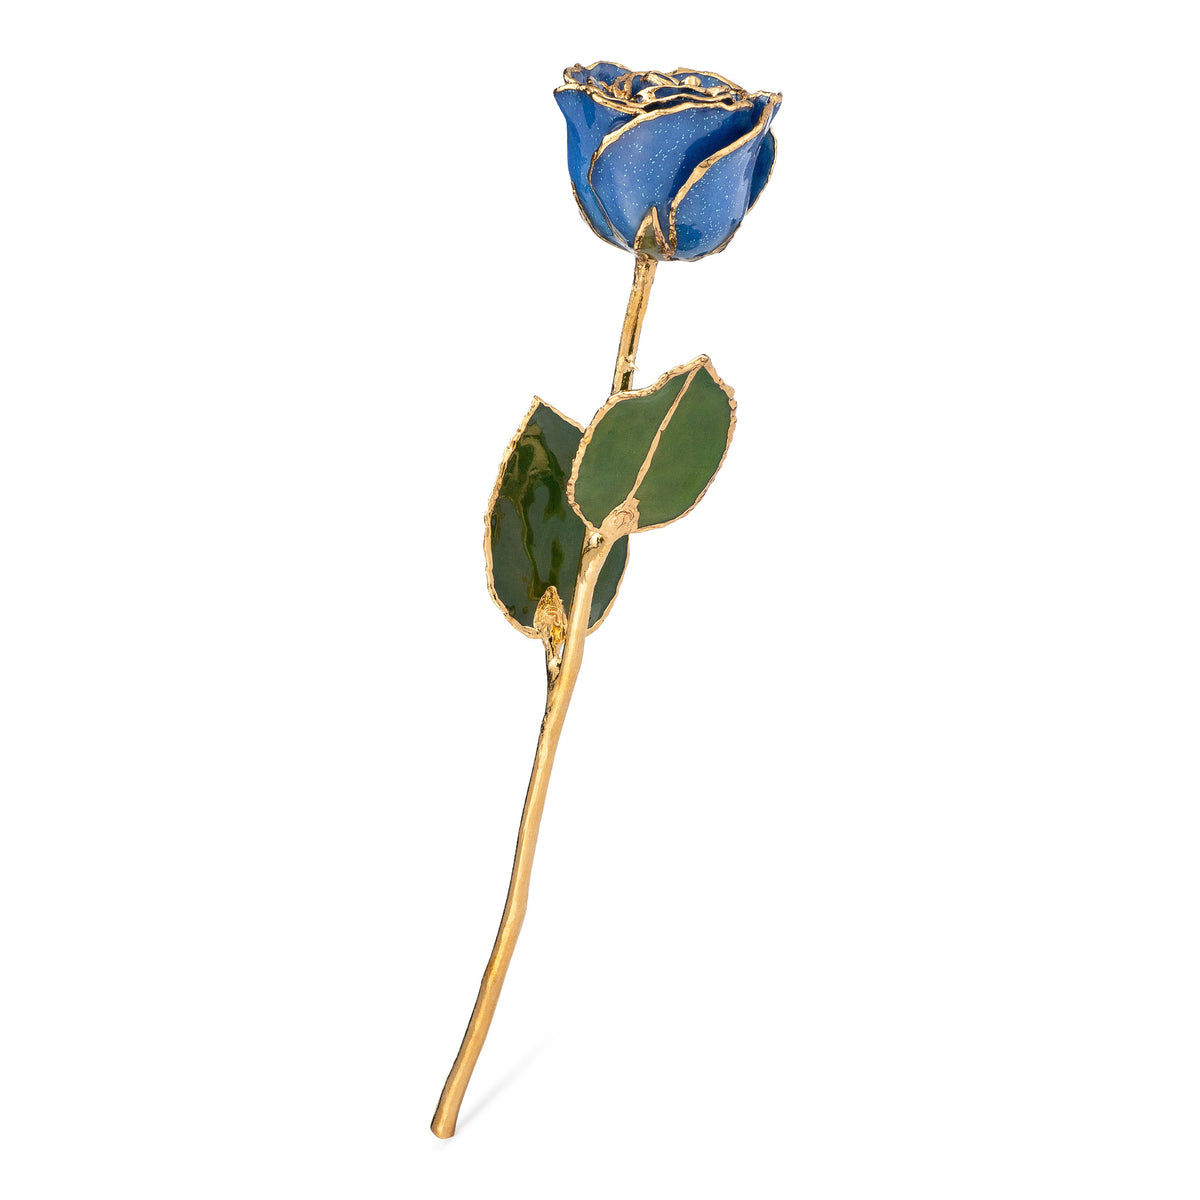 24K Gold Trimmed Forever Rose with Sapphire Blue Petals with Sapphire Suspended Sparkles. View of Stem, Leaves, and Rose Petals and Showing Detail of Gold Trim